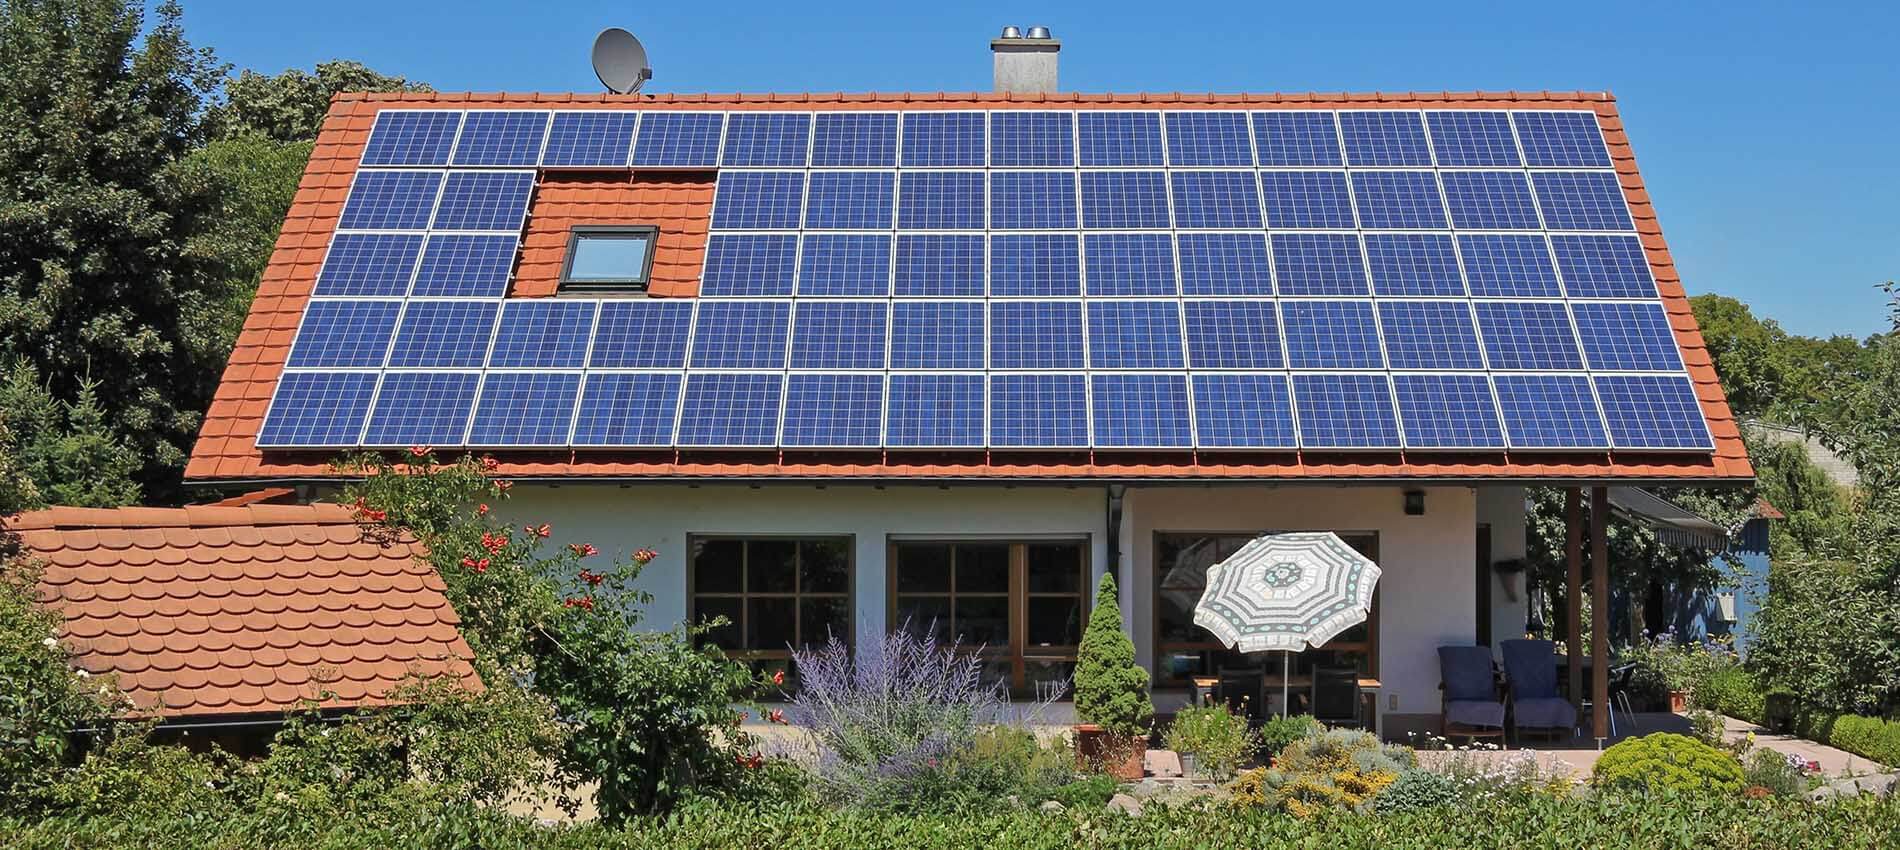 10kW Solar System: Compare Prices &  Returns